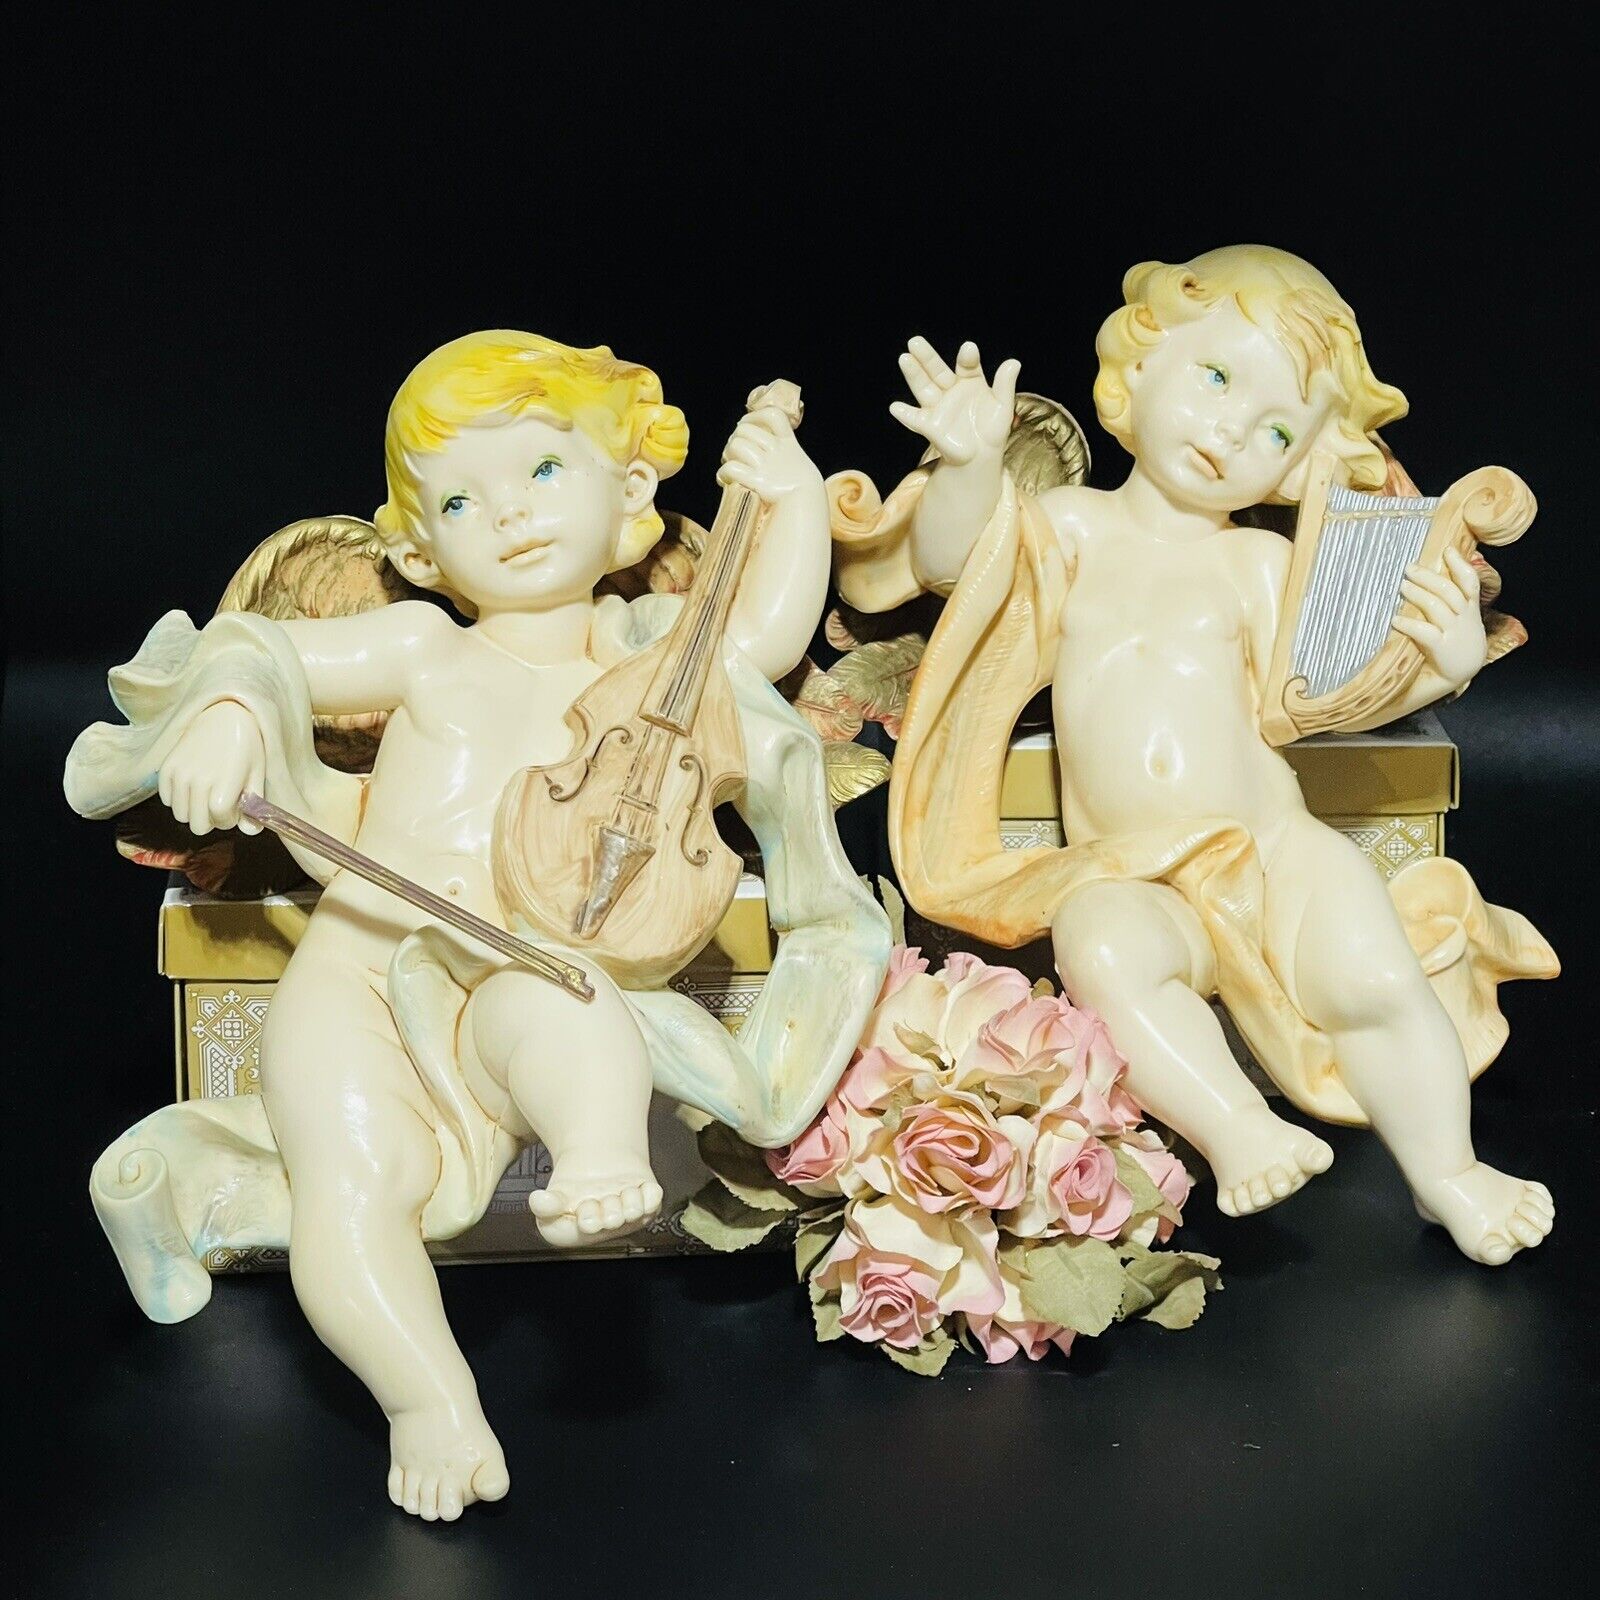 Winged Angel Cherubs Made In Italy Wall Decor Vintage 11-13” Tall SET OF 2 *